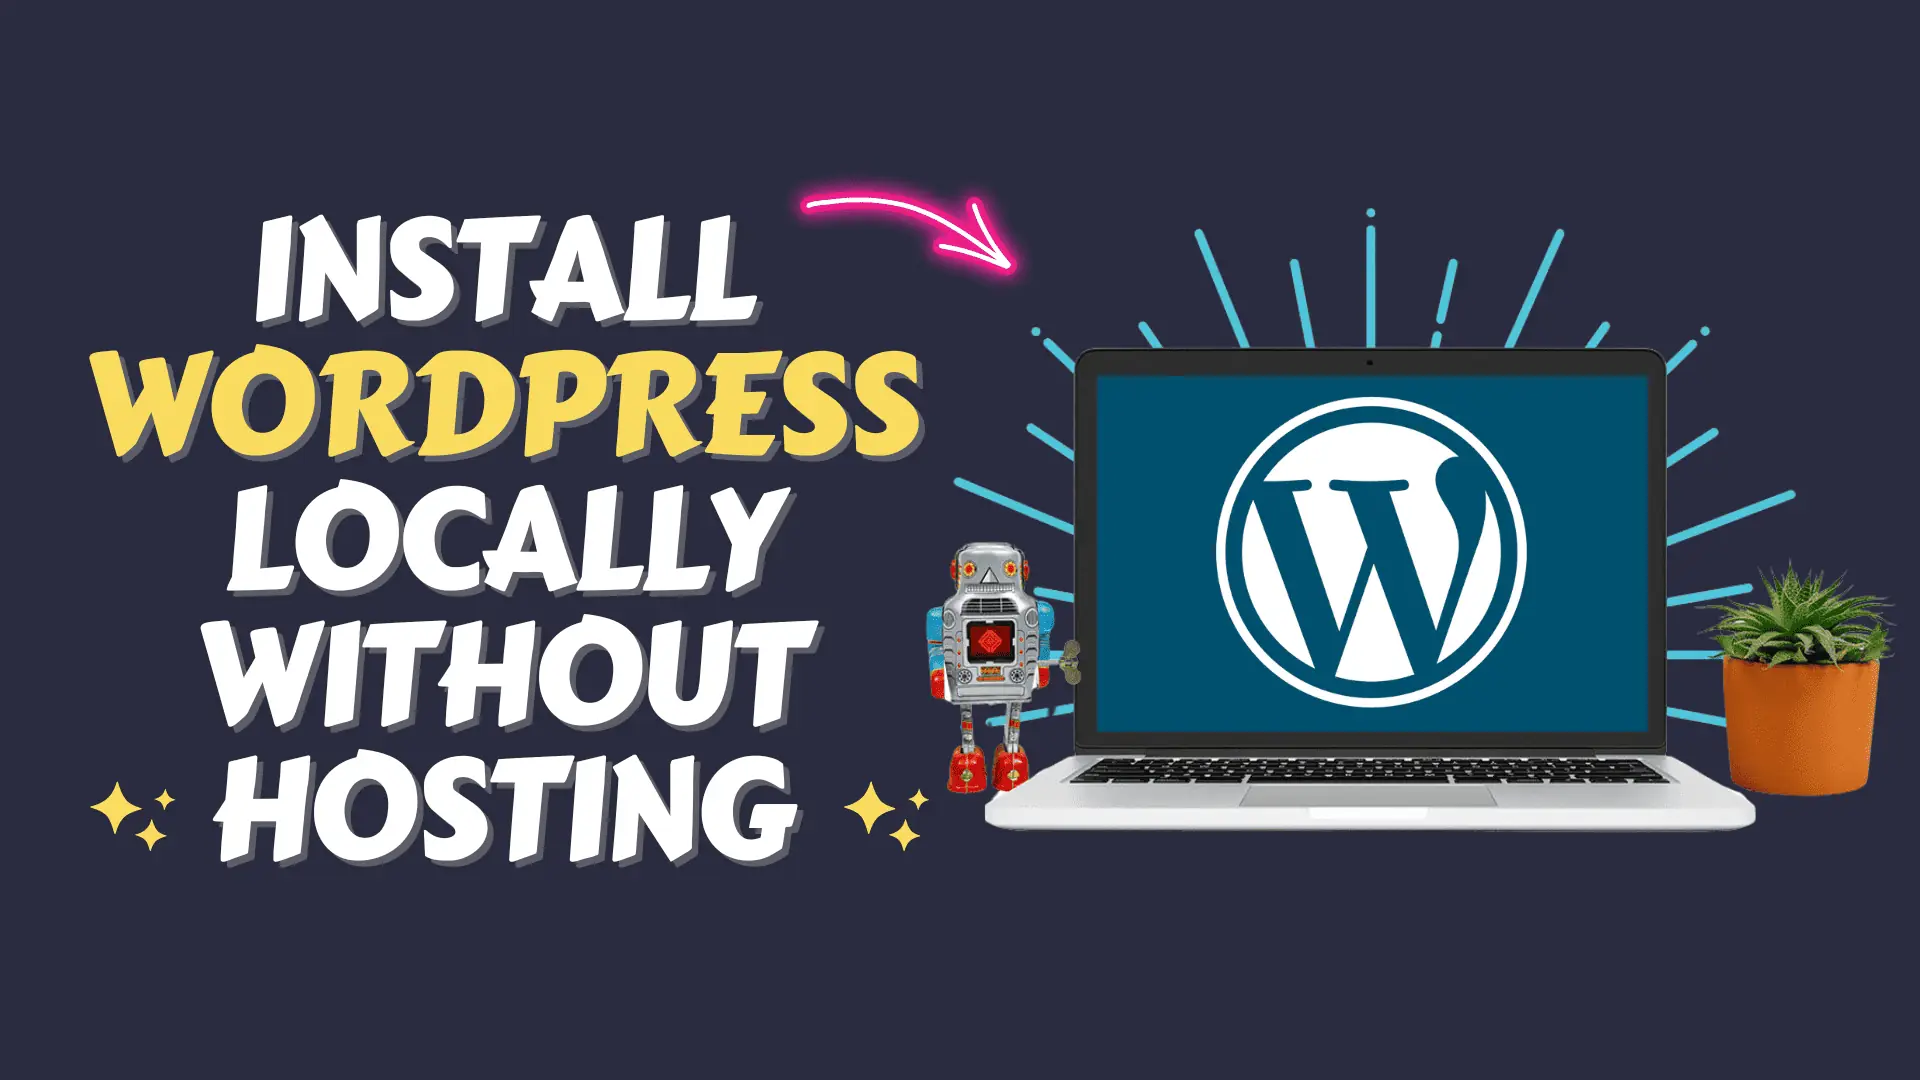 Install WordPress Locally Without Hosting